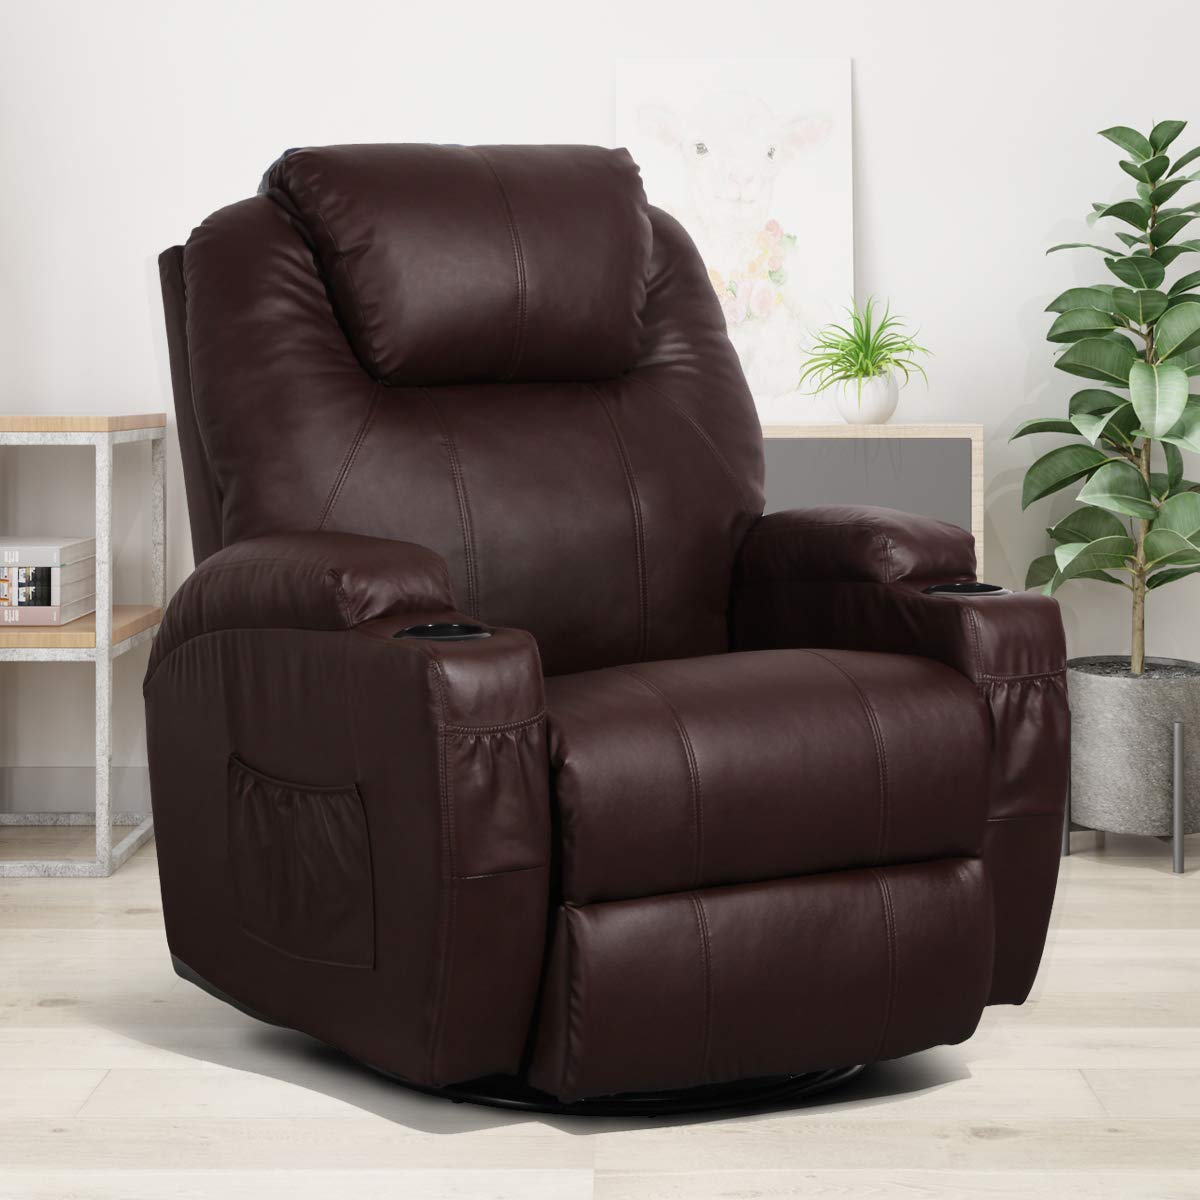 Comfortable Recliners for a Lazy Evening and How to Choose the Best One